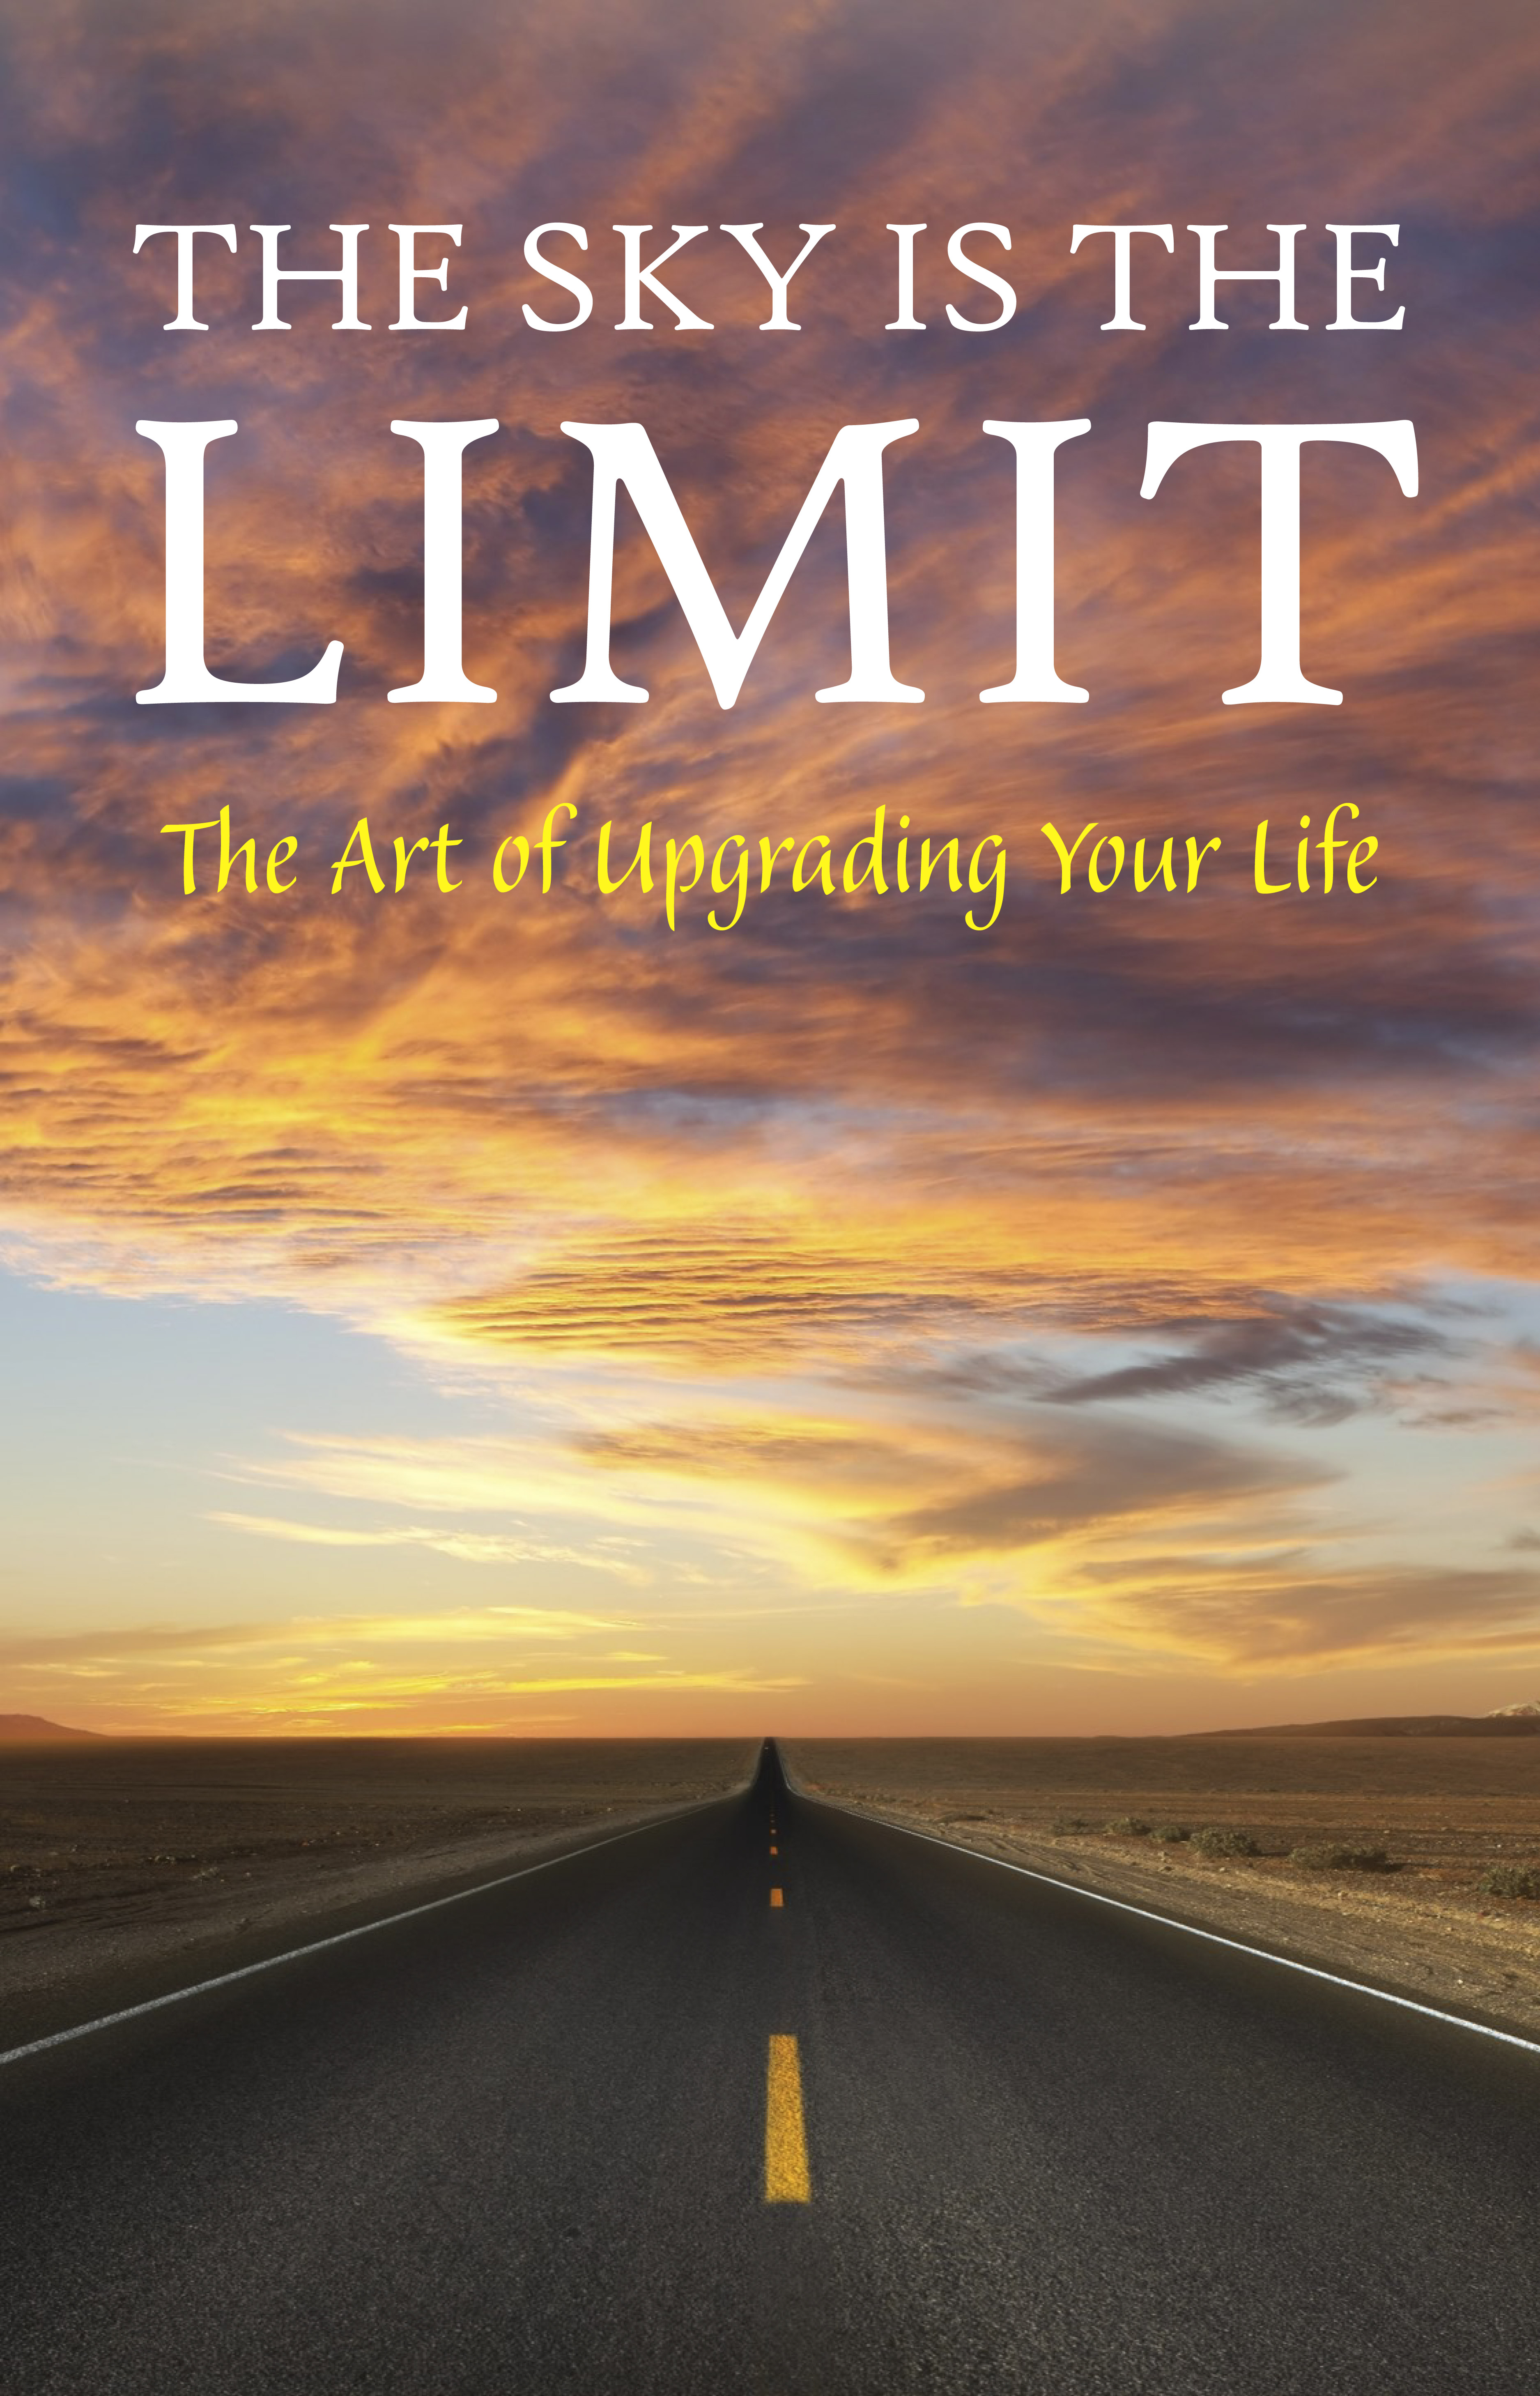 The Sky is the Limit: The Art of Upgrading Your Life: 50 Classic Self Help Books Including.: Think and Grow Rich, The Way to Wealth, As A Man Thinketh, The Art of War, Acres of Diamonds and many more